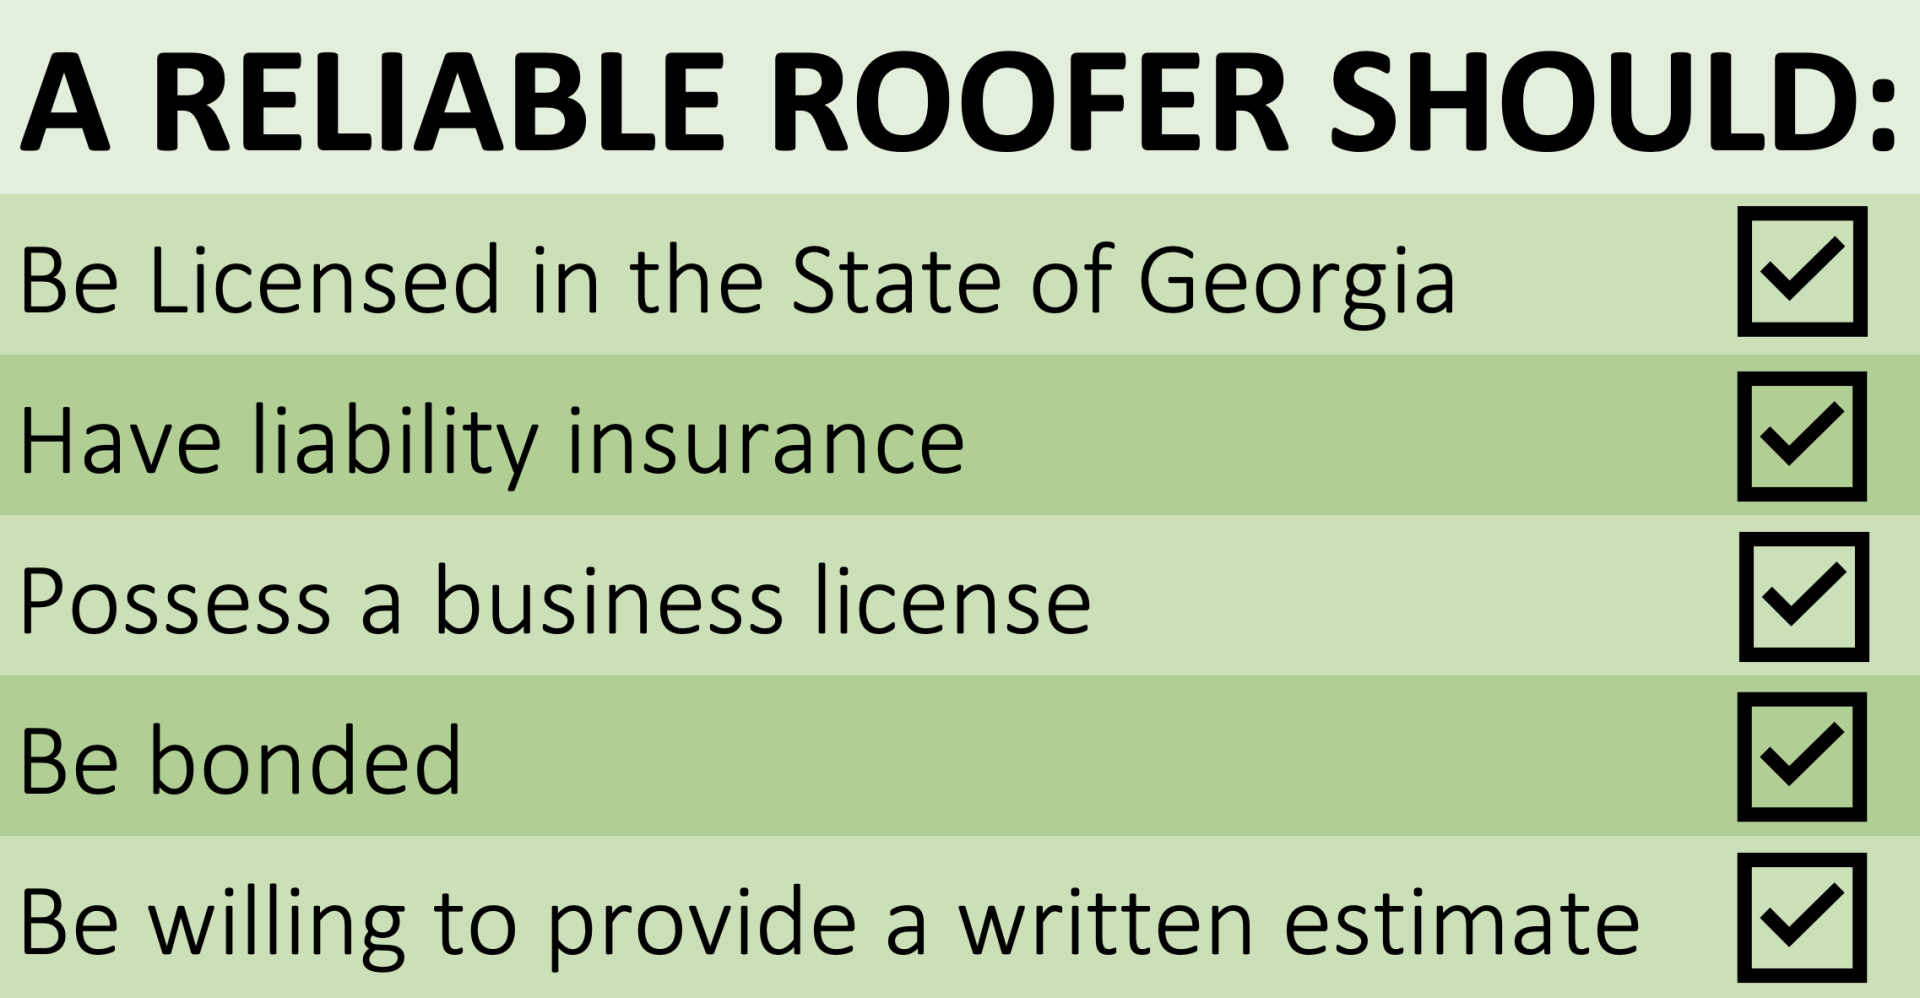 roofing contractor near me